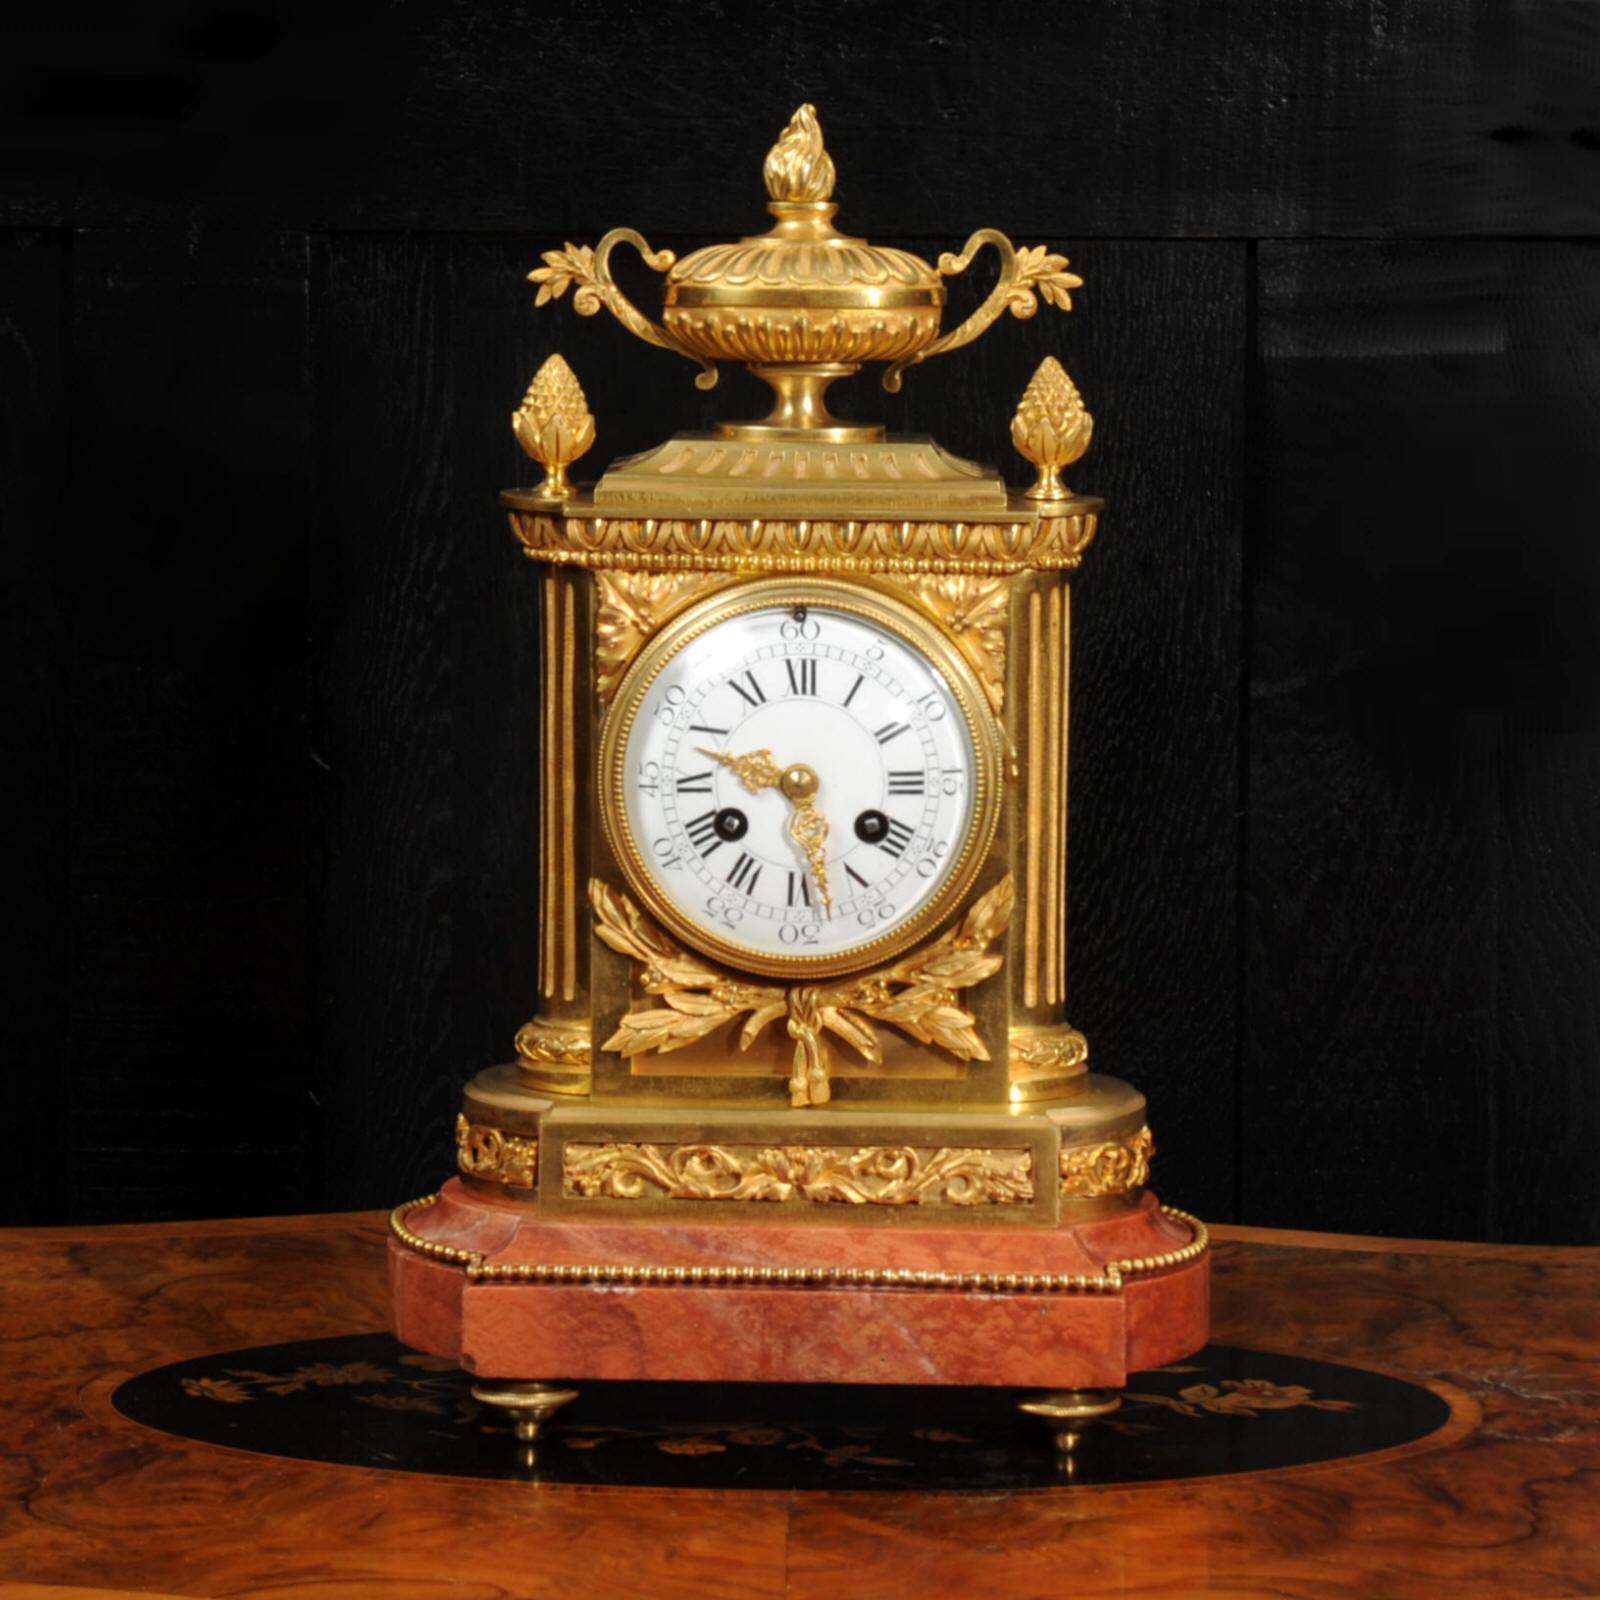 A stunning original antique French clock by the famous bronze founder Charpentier of Paris. It is Louis XVI neoclassical style and of superb quality, made in ormolu (finely gilded bronze). The case is formed with fluted pilasters with semi-circular